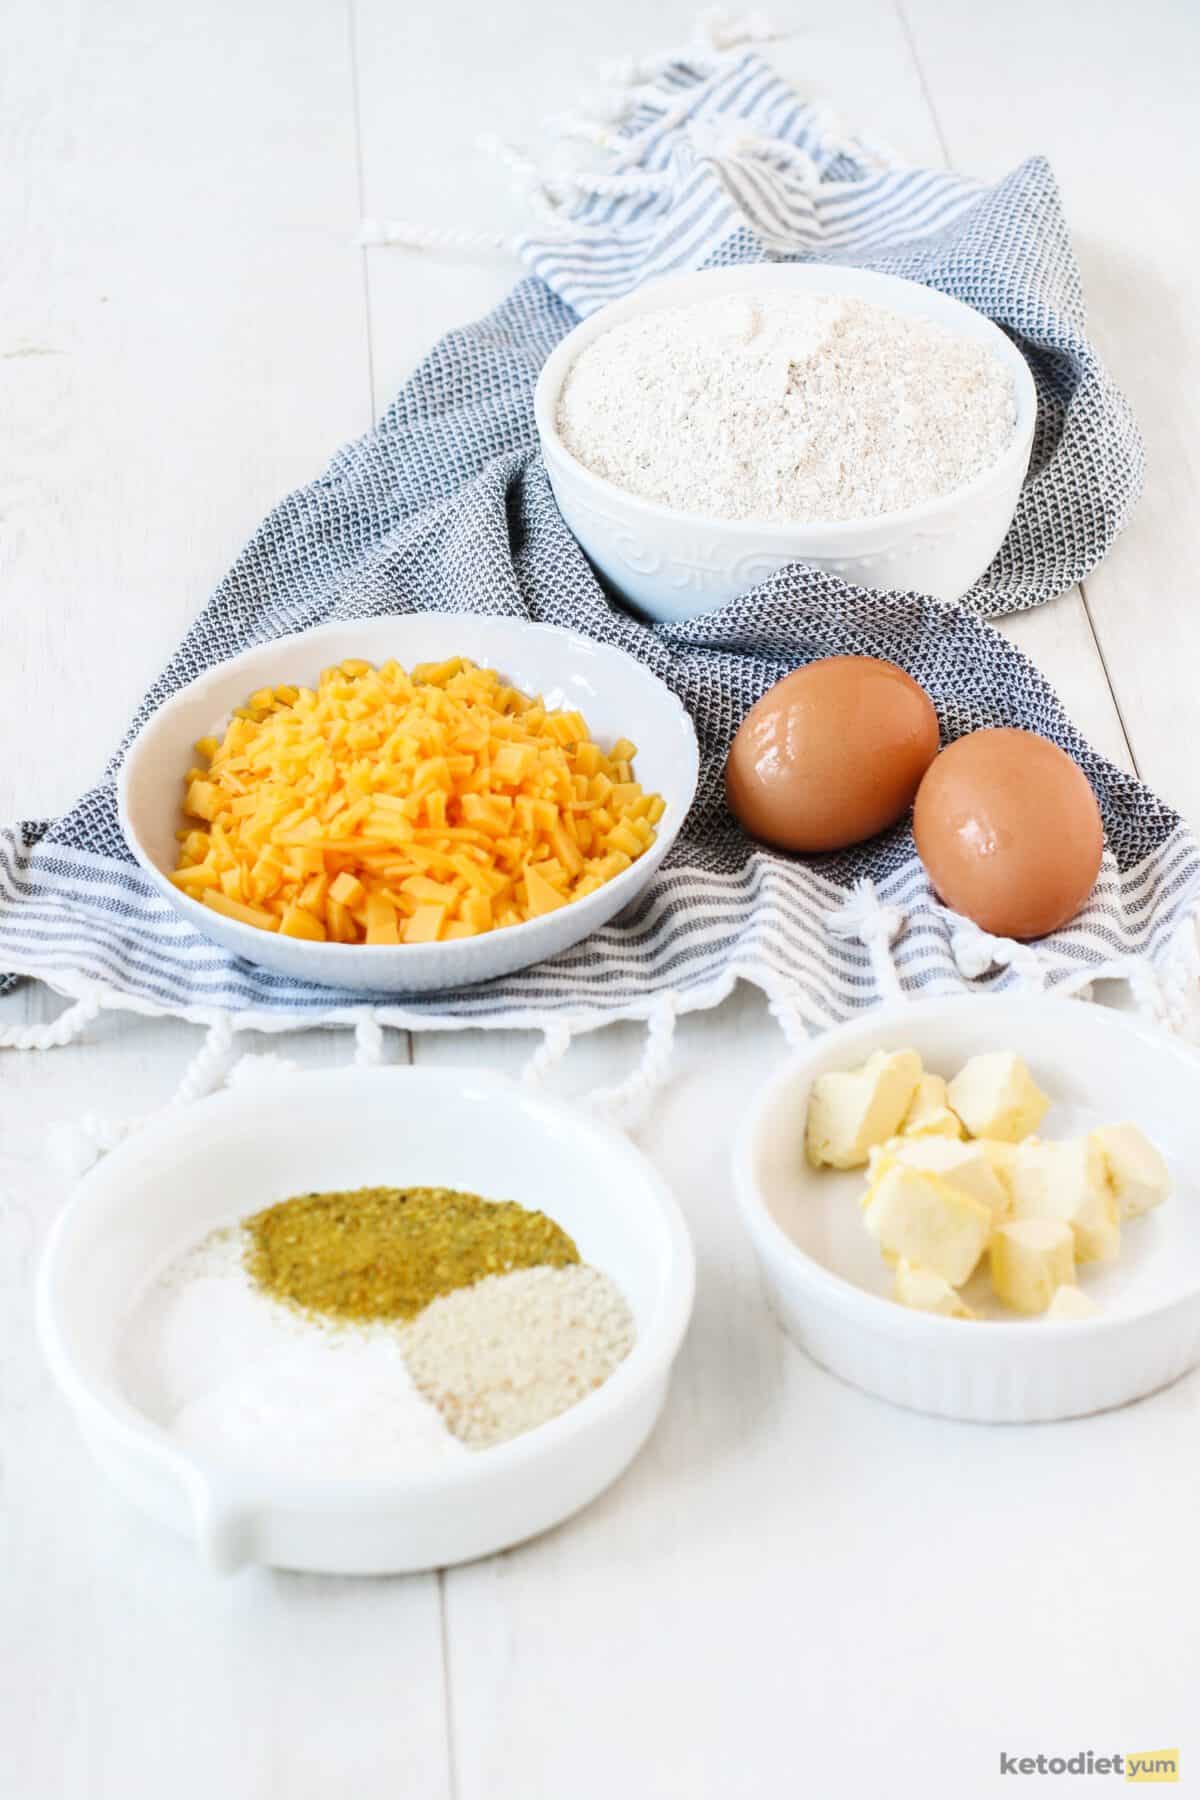 Ingredients arranged on a table to make keto cheddar biscuits including eggs, cheddar cheese, butter and almond flour